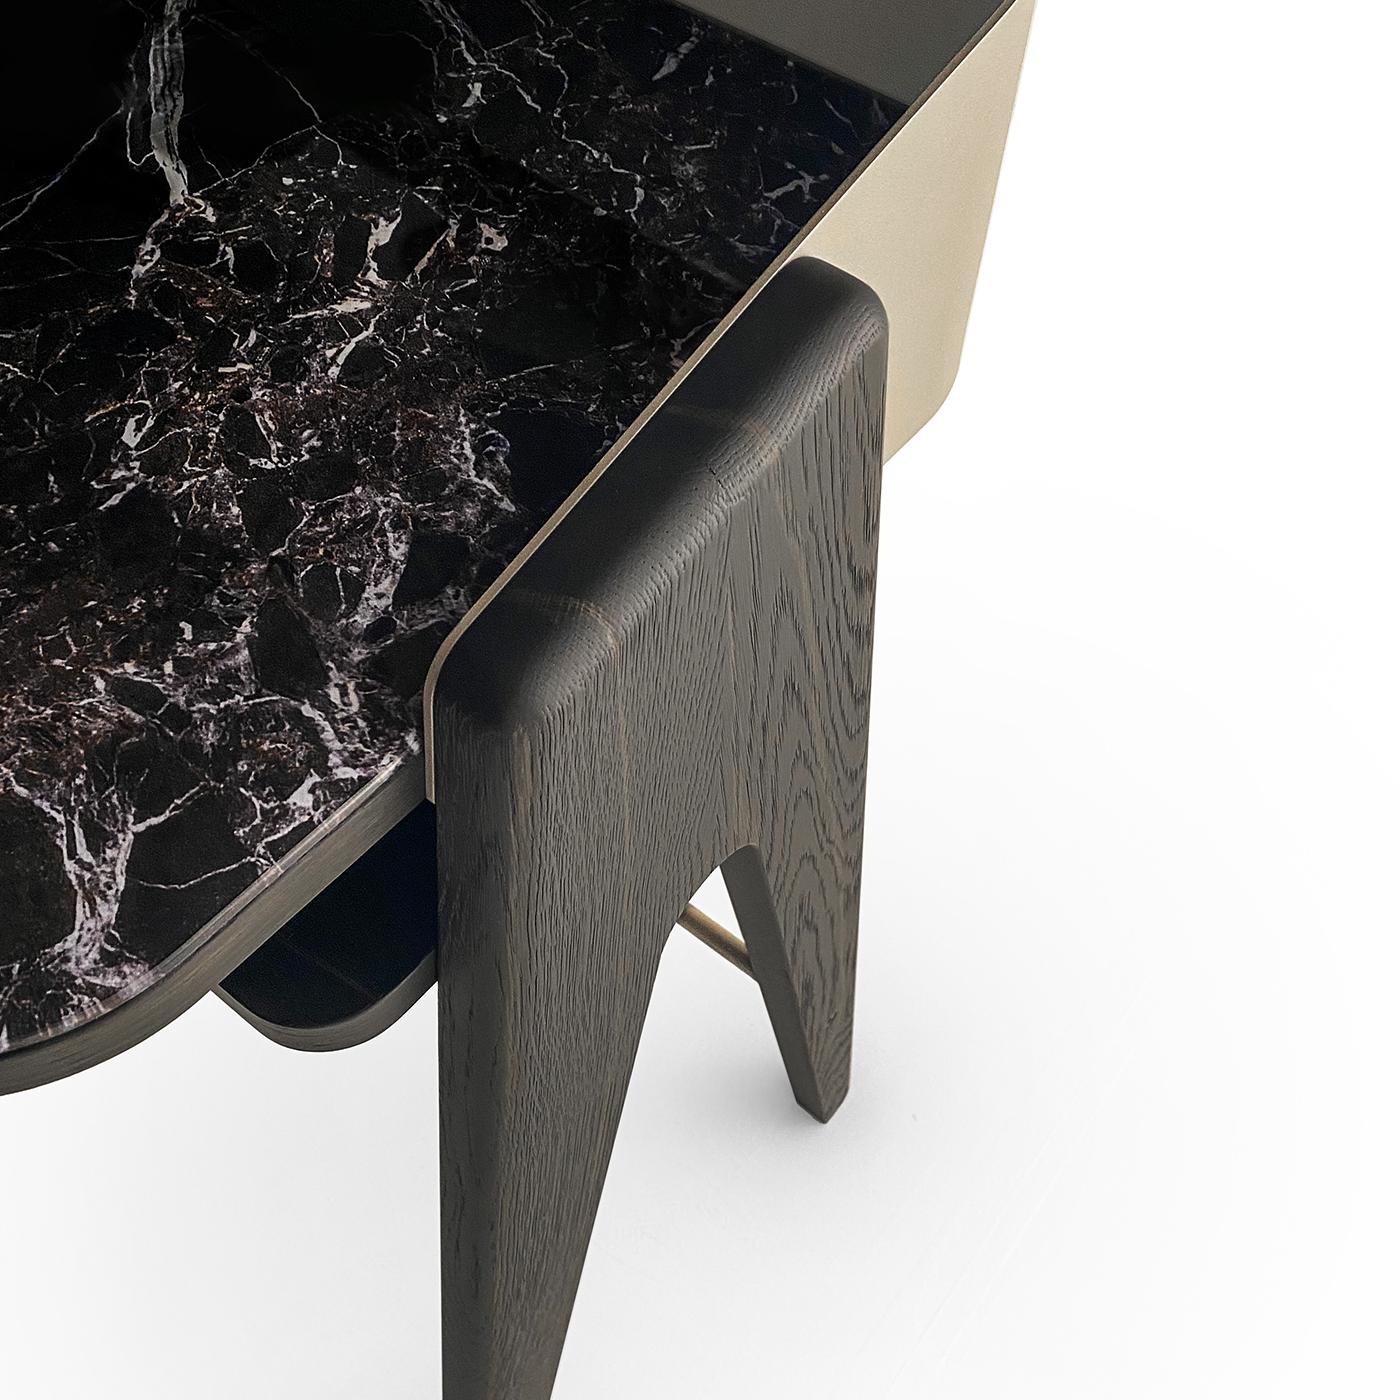 Brimming with exclusivity, this writing/vanity desk is an exercise in superb finishes also borrowed from nature. Distinguishing detail is the Breccia Imperiale marble effect the back-printed glass top flaunts, its shades harmonizing with the